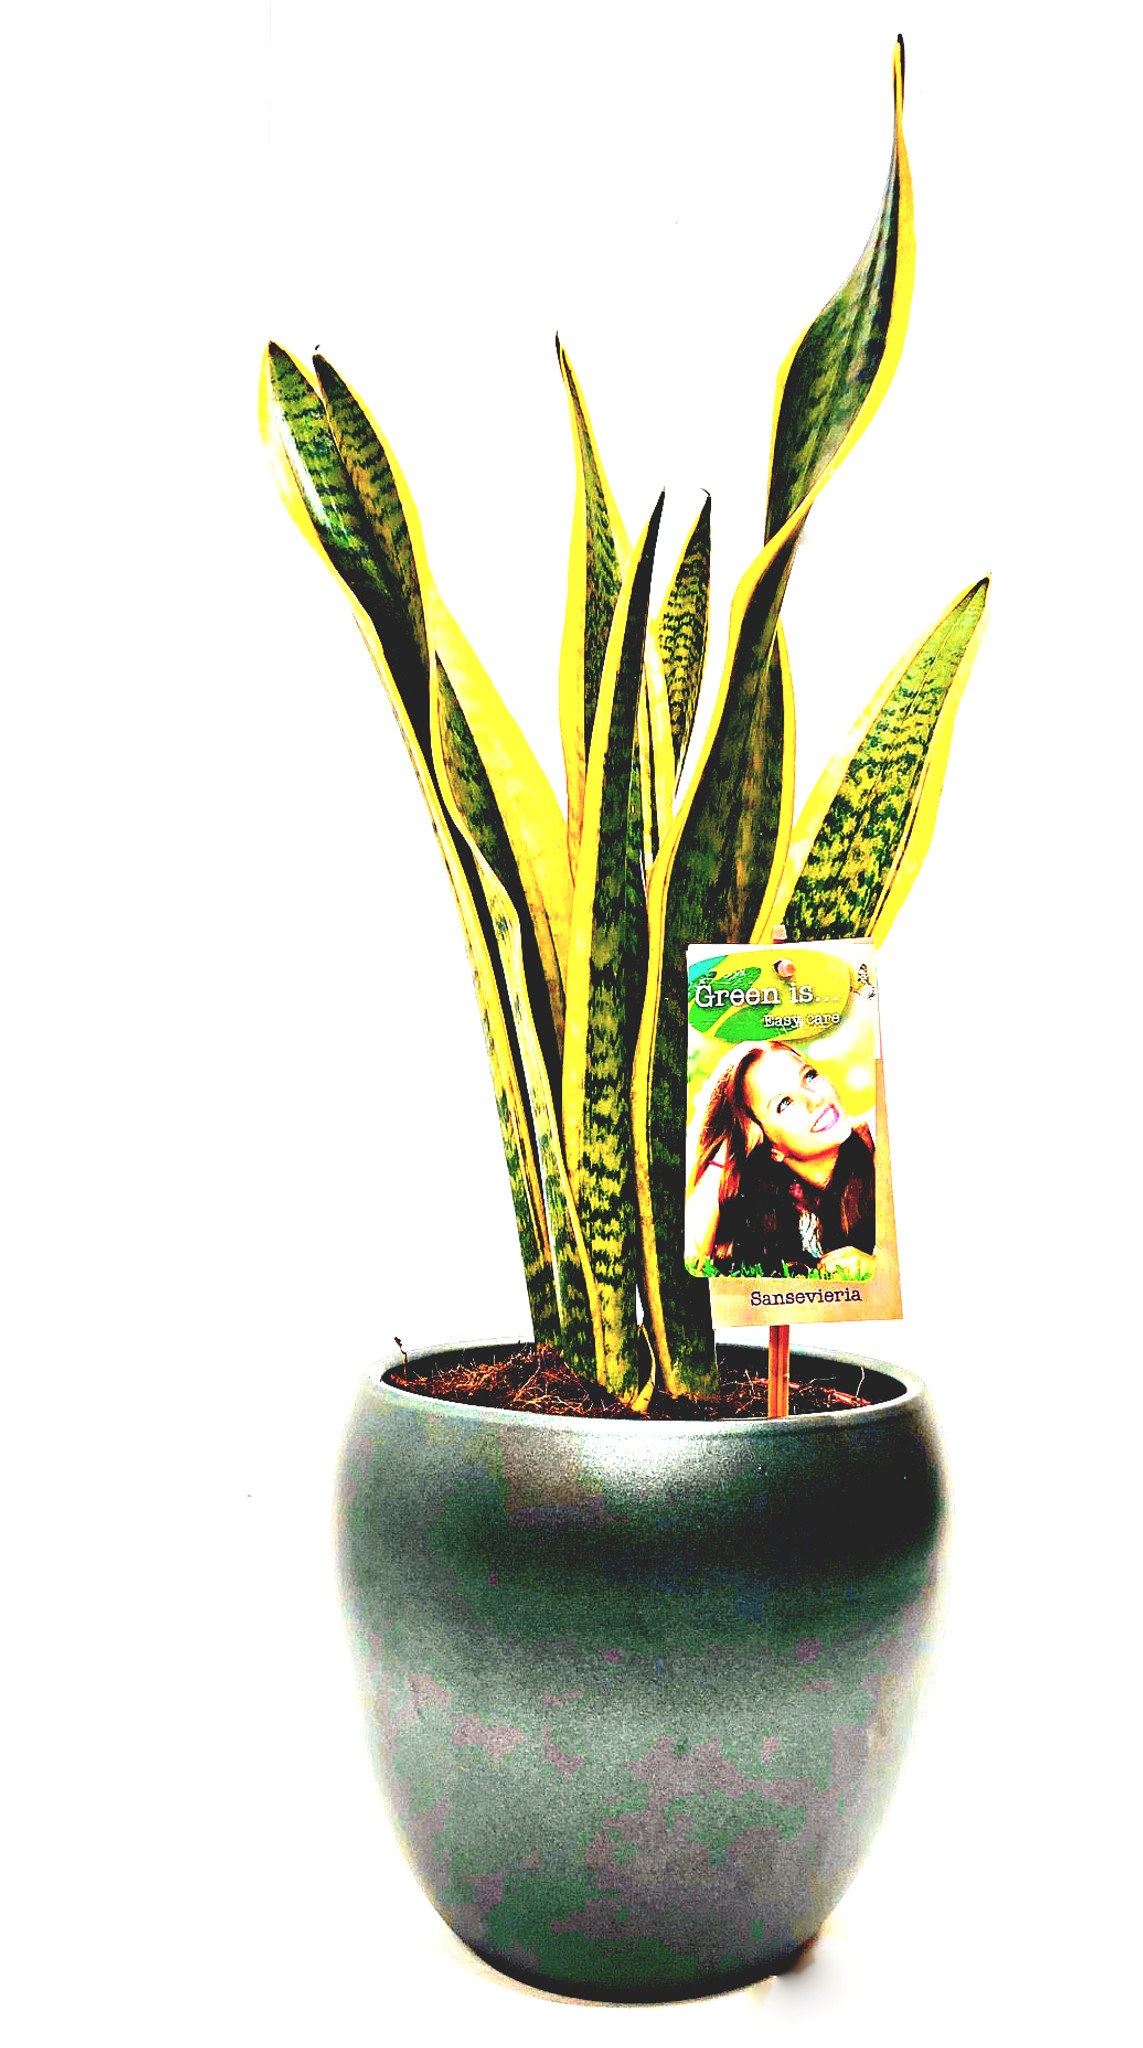 Other options : Mother's in law plant, sansevieria in black  ceramic pot.